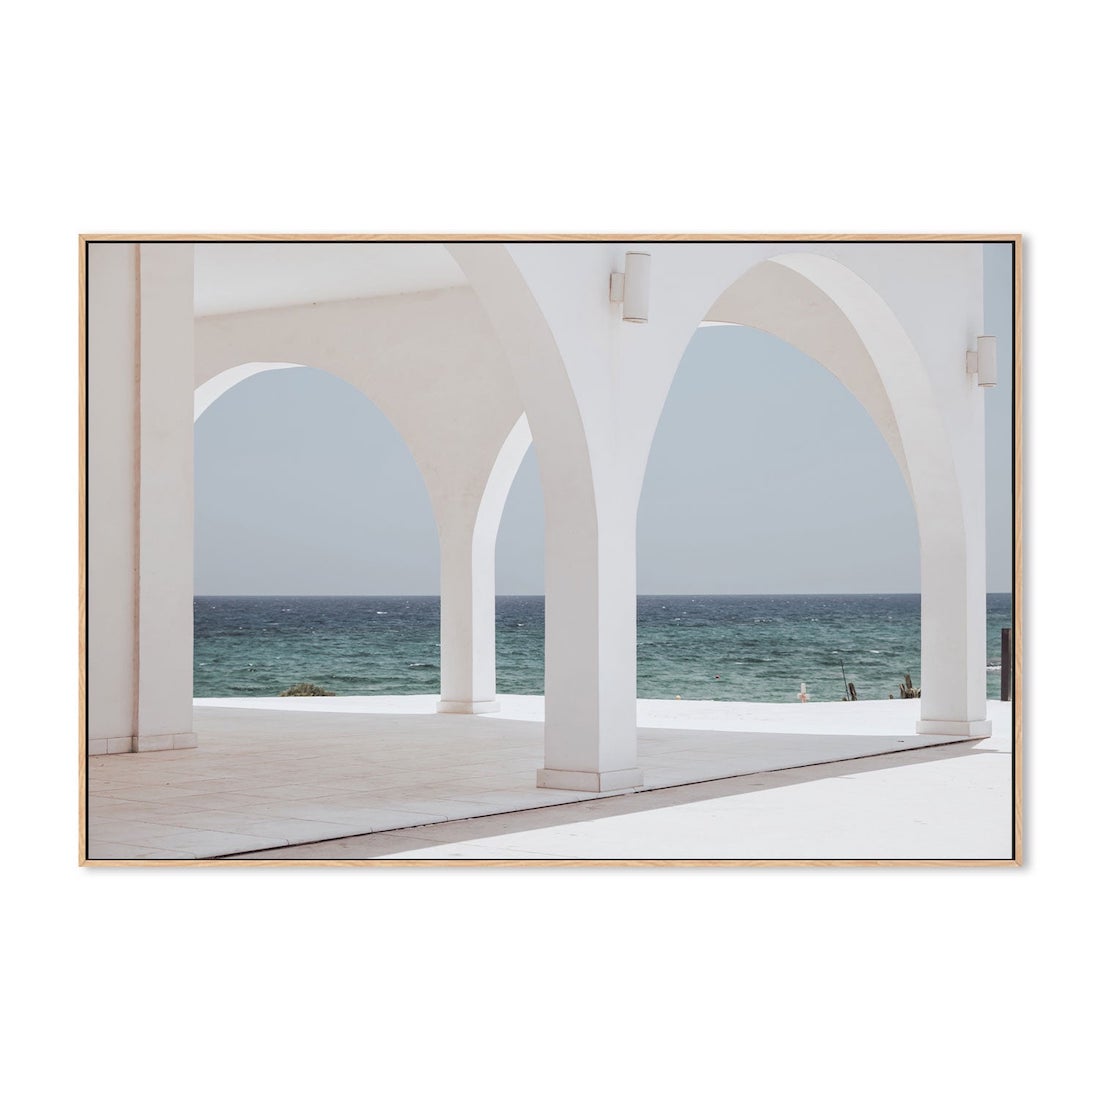 White Cyprus artwork is one of our favourites from Gioia best place to buy artwork online